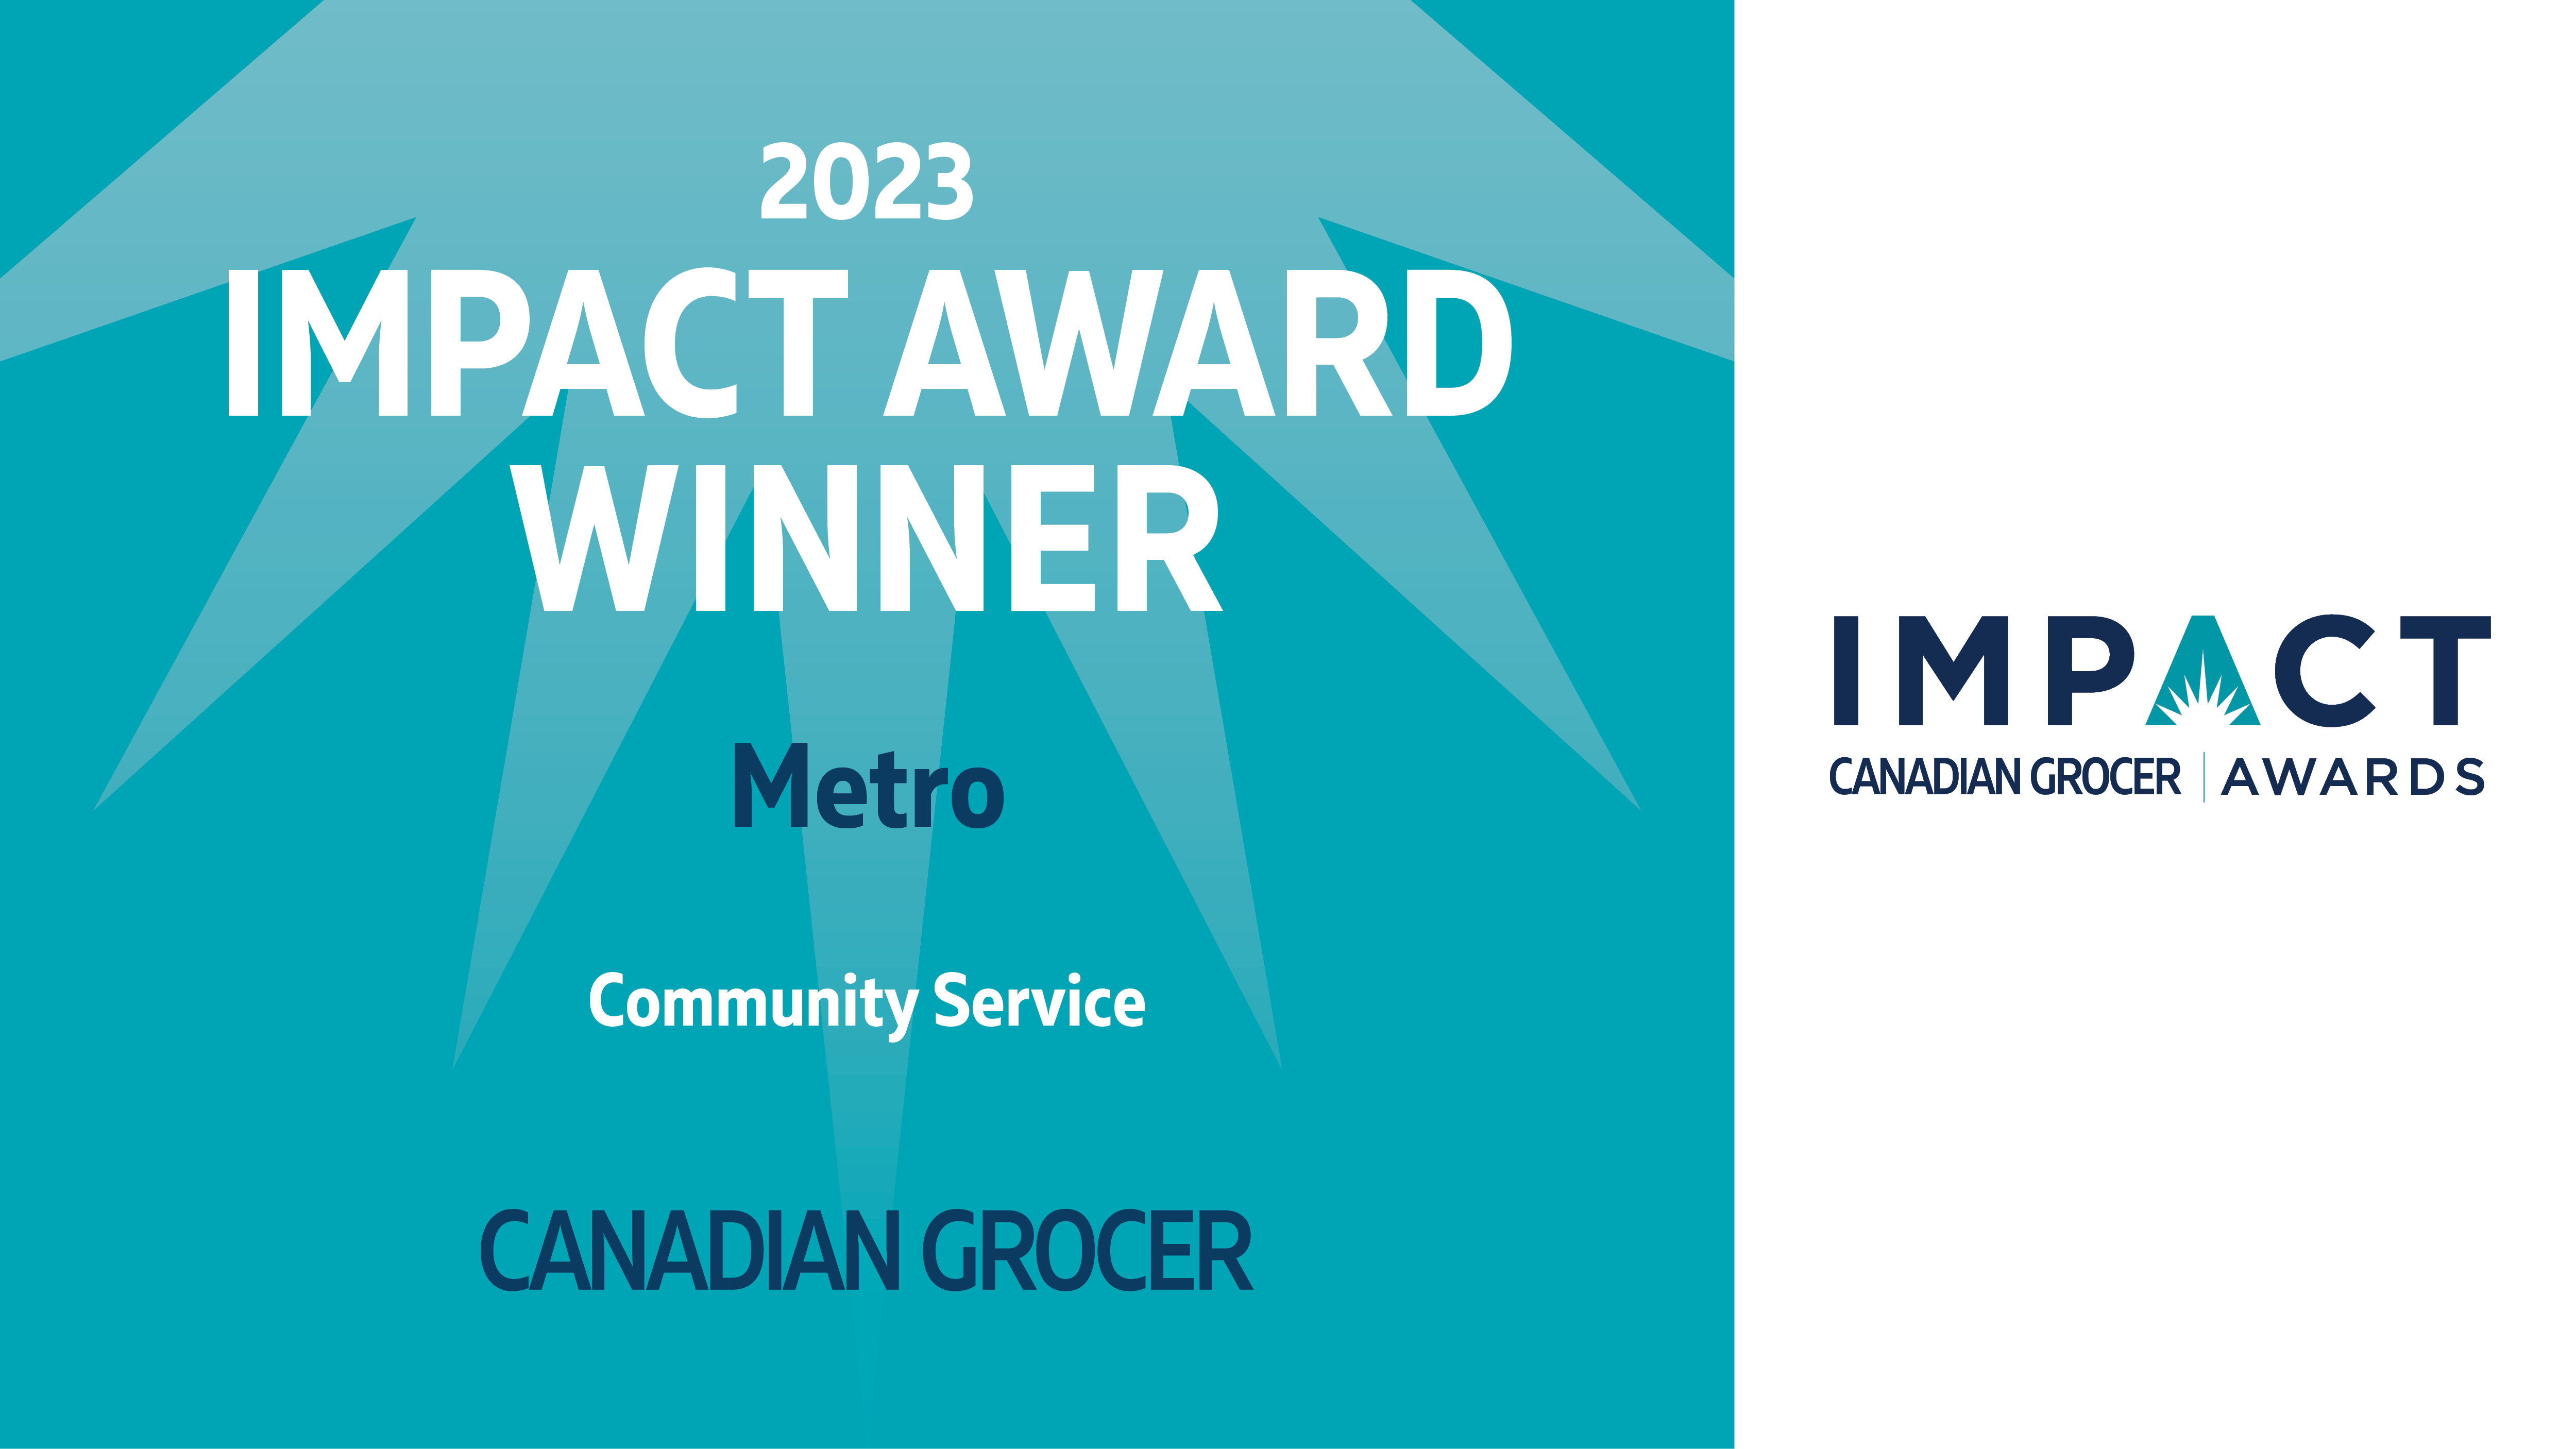 METRO wins an Impact Award for its Healthy Together campaign